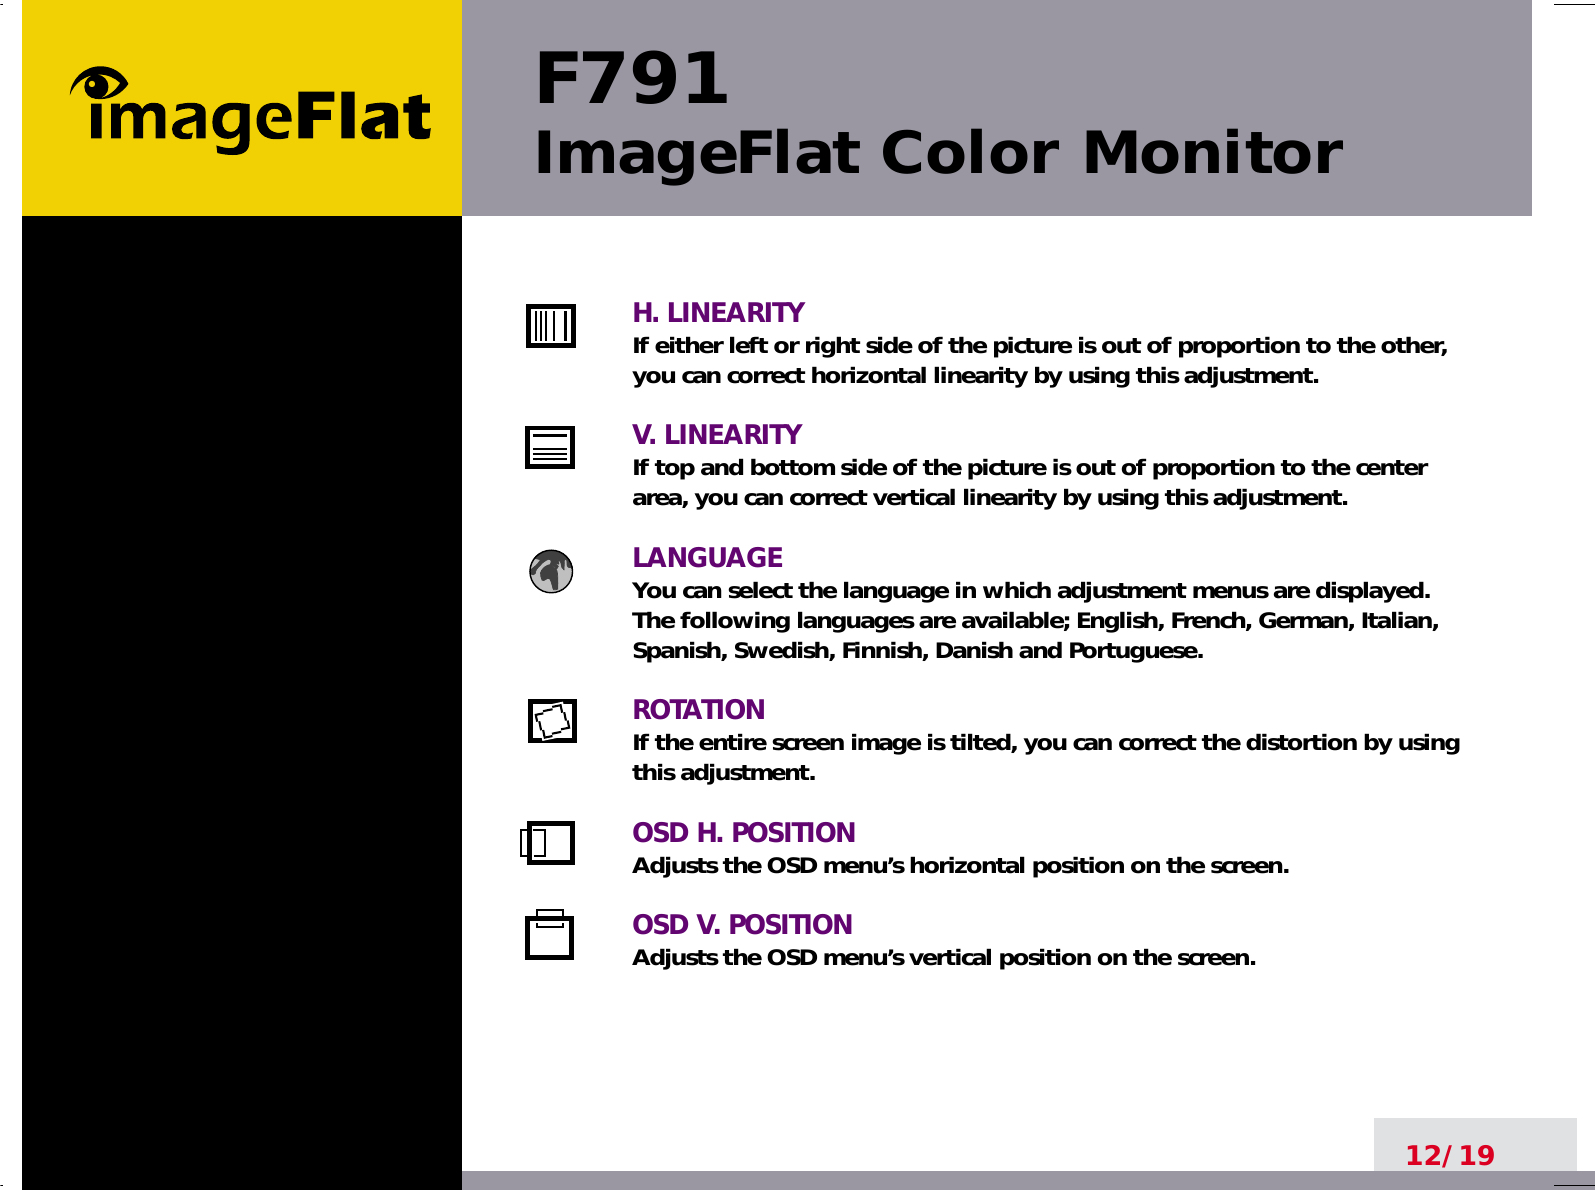 F791ImageFlat Color Monitor12/19H. LINEARITYIf either left or right side of the picture is out of proportion to the other,you can correct horizontal linearity by using this adjustment.V. LINEARITYIf top and bottom side of the picture is out of proportion to the centerarea, you can correct vertical linearity by using this adjustment.LANGUAGEYou can select the language in which adjustment menus are displayed.The following languages are available; English, French, German, Italian,Spanish, Swedish, Finnish, Danish and Portuguese.ROTATIONIf the entire screen image is tilted, you can correct the distortion by usingthis adjustment.OSD H. POSITIONAdjusts the OSD menu’s horizontal position on the screen.OSD V. POSITIONAdjusts the OSD menu’s vertical position on the screen.